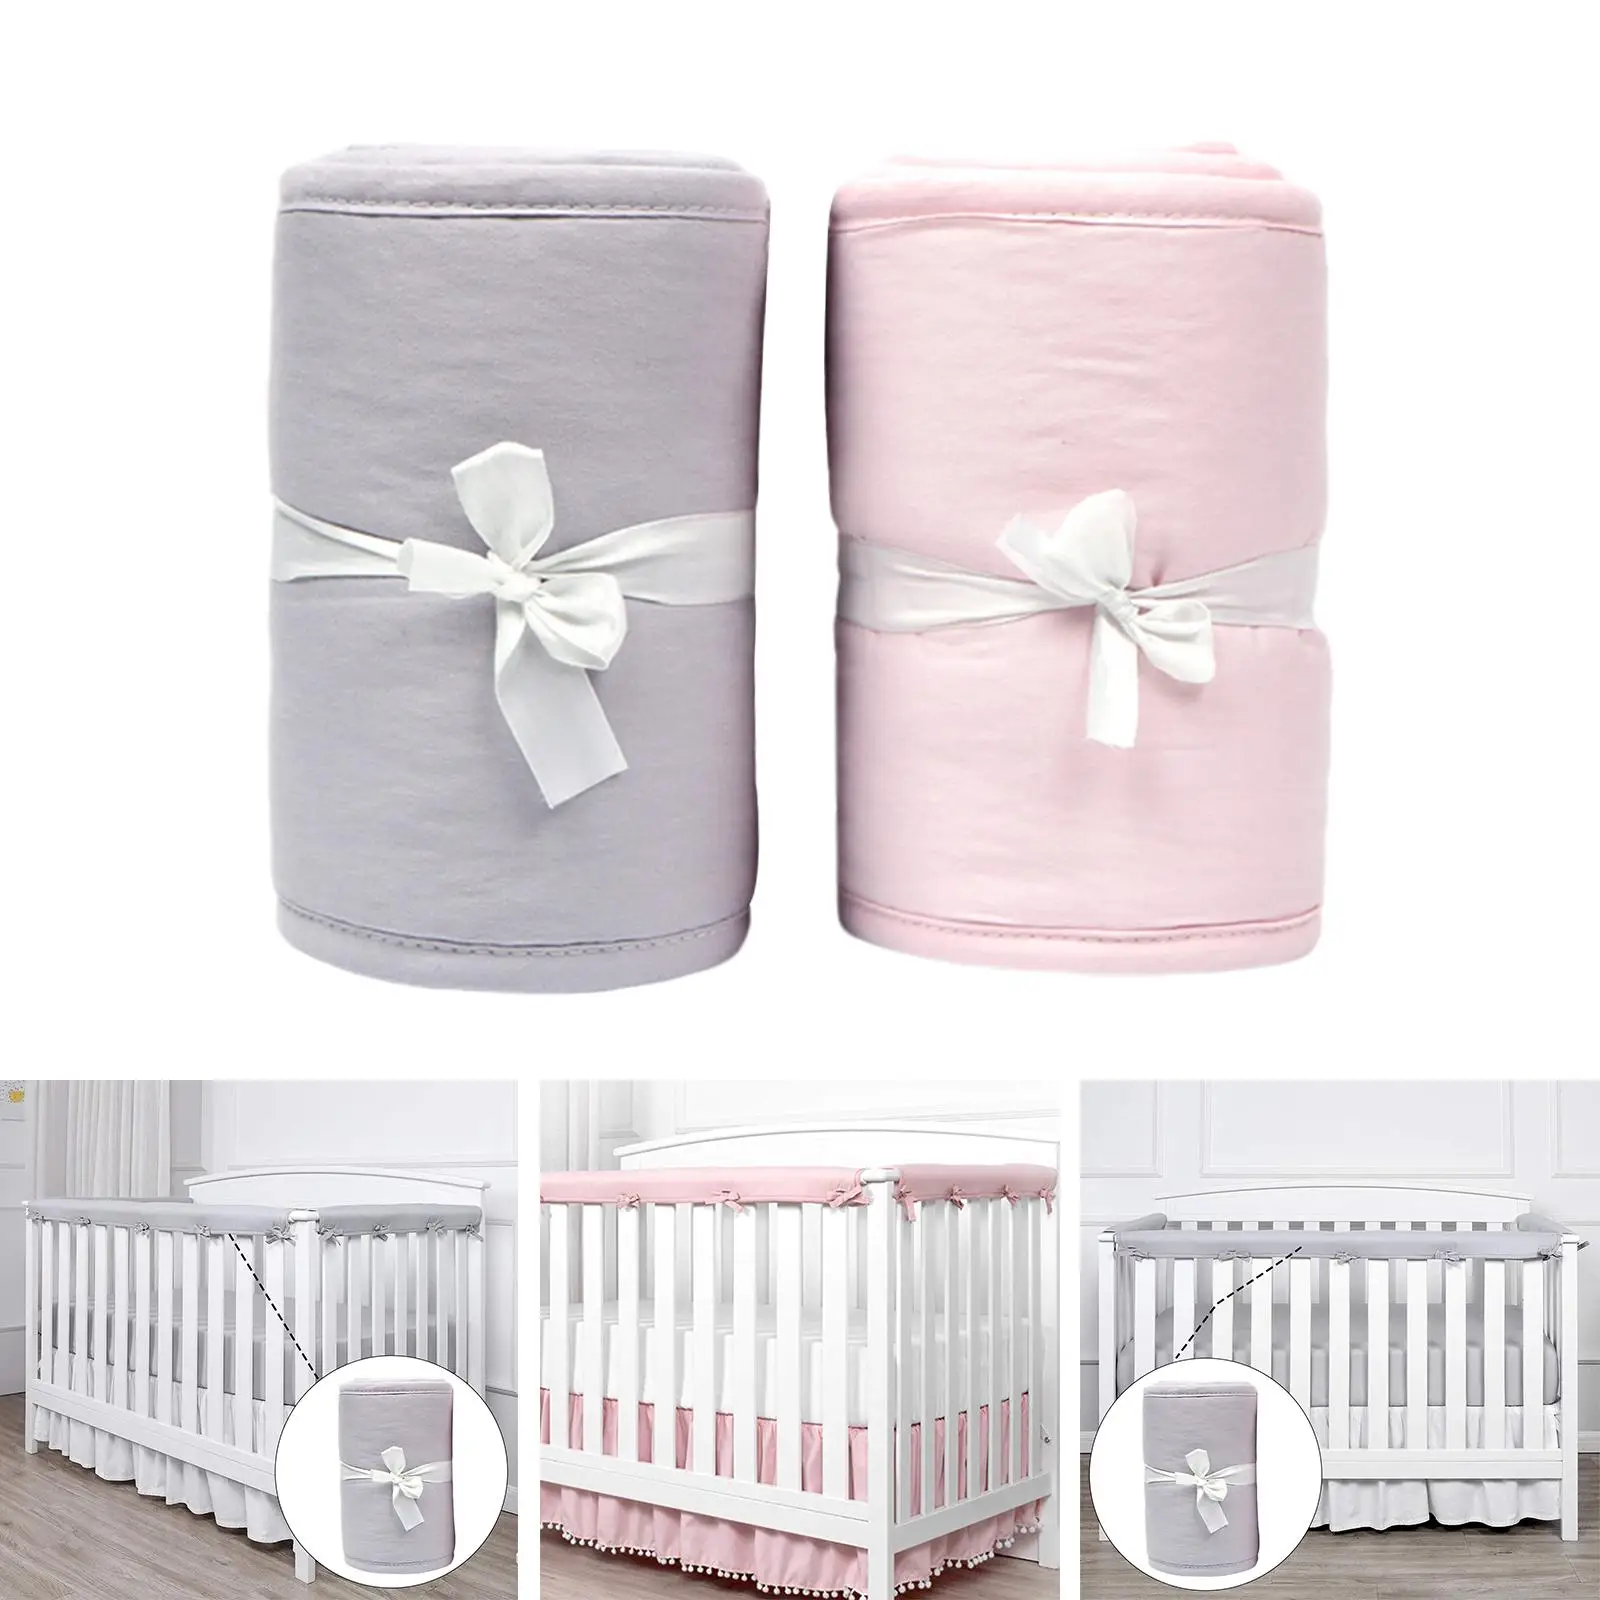 3Pcs Bed Rail Cover Anti Collision Strip Teething Protector Baby Safety Products Guard Crib Bed Rail Cover for Gifts Toddlers